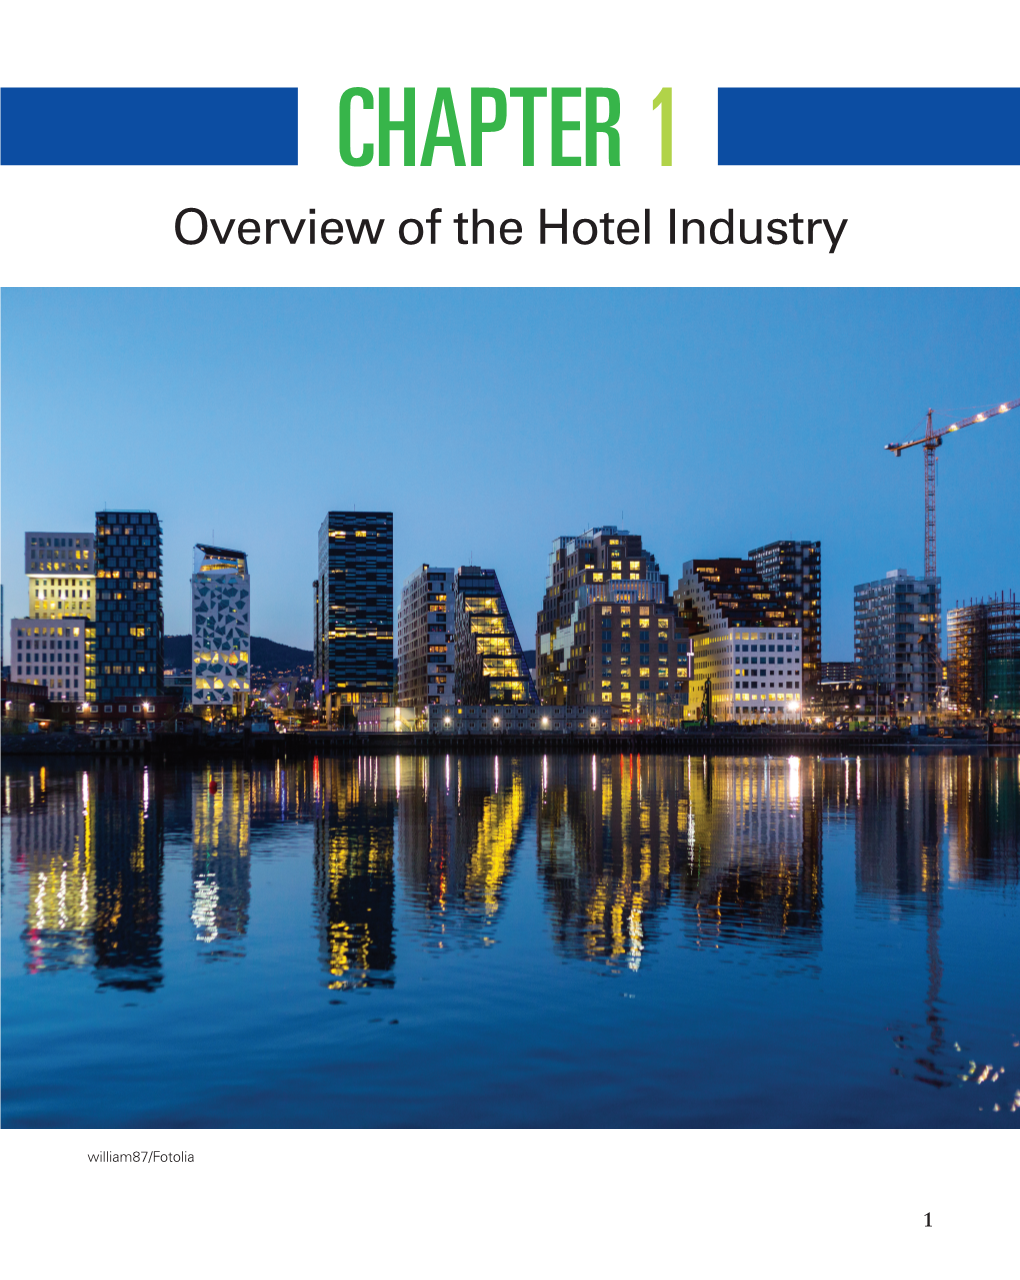 CHAPTER 1 Overview of the Hotel Industry